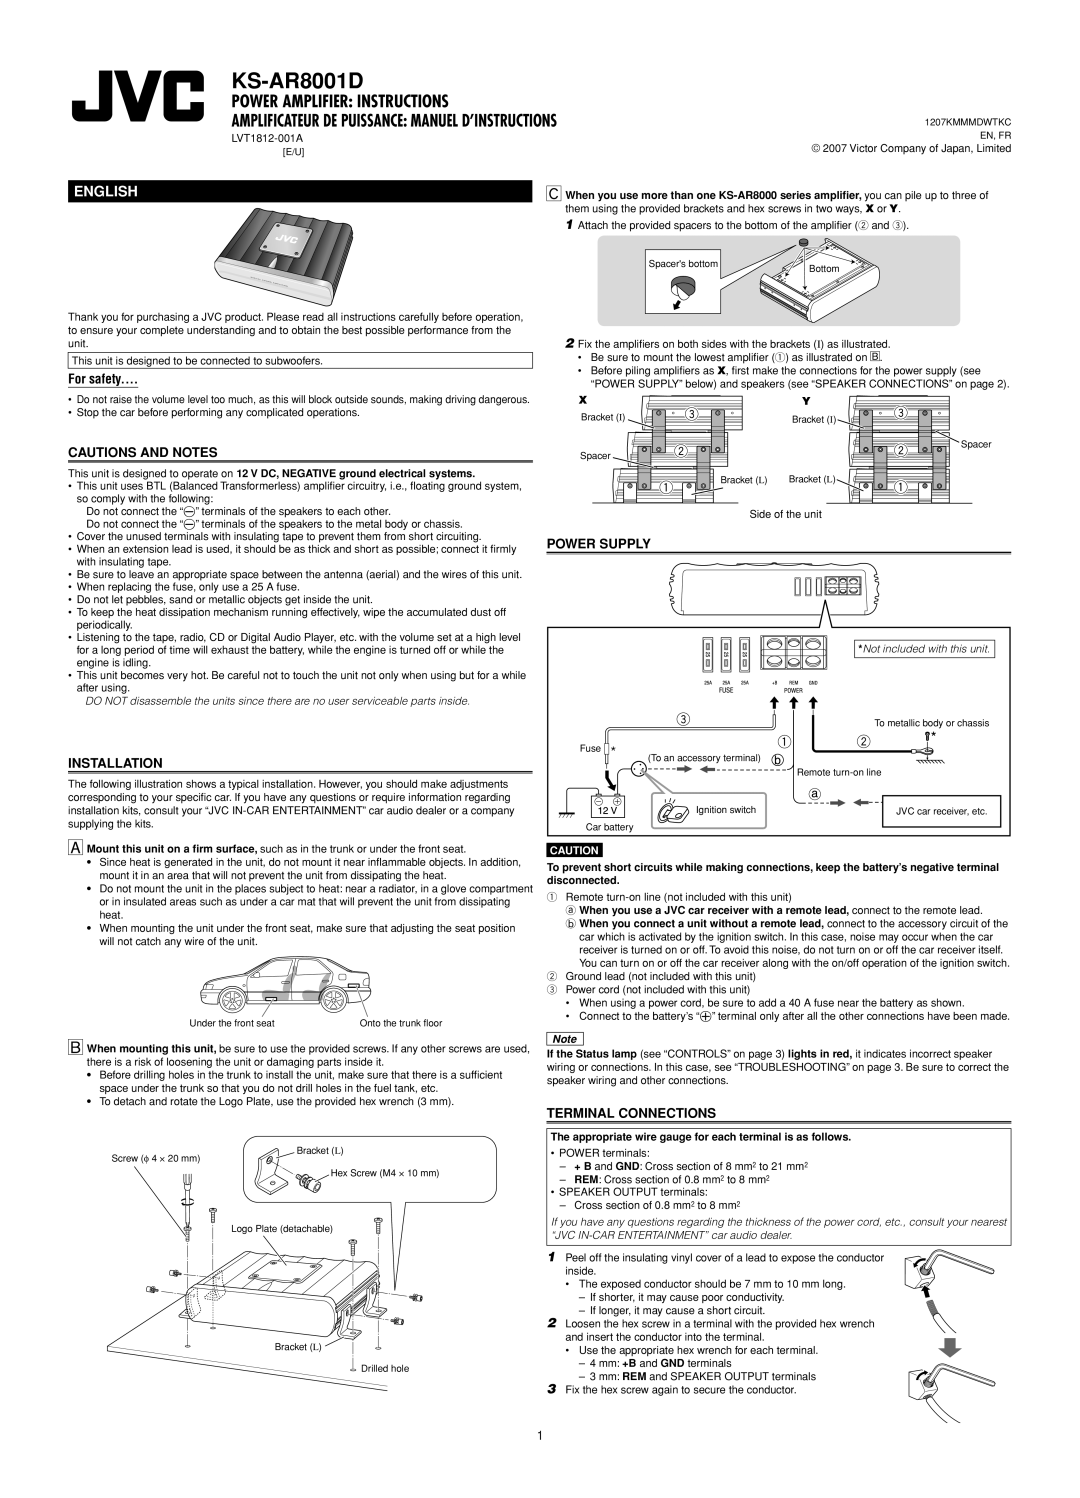 JVC KS-AR8001D Power Amplifier Instructions, English, For safety, Cautions And Notes, Power Supply, Installation 